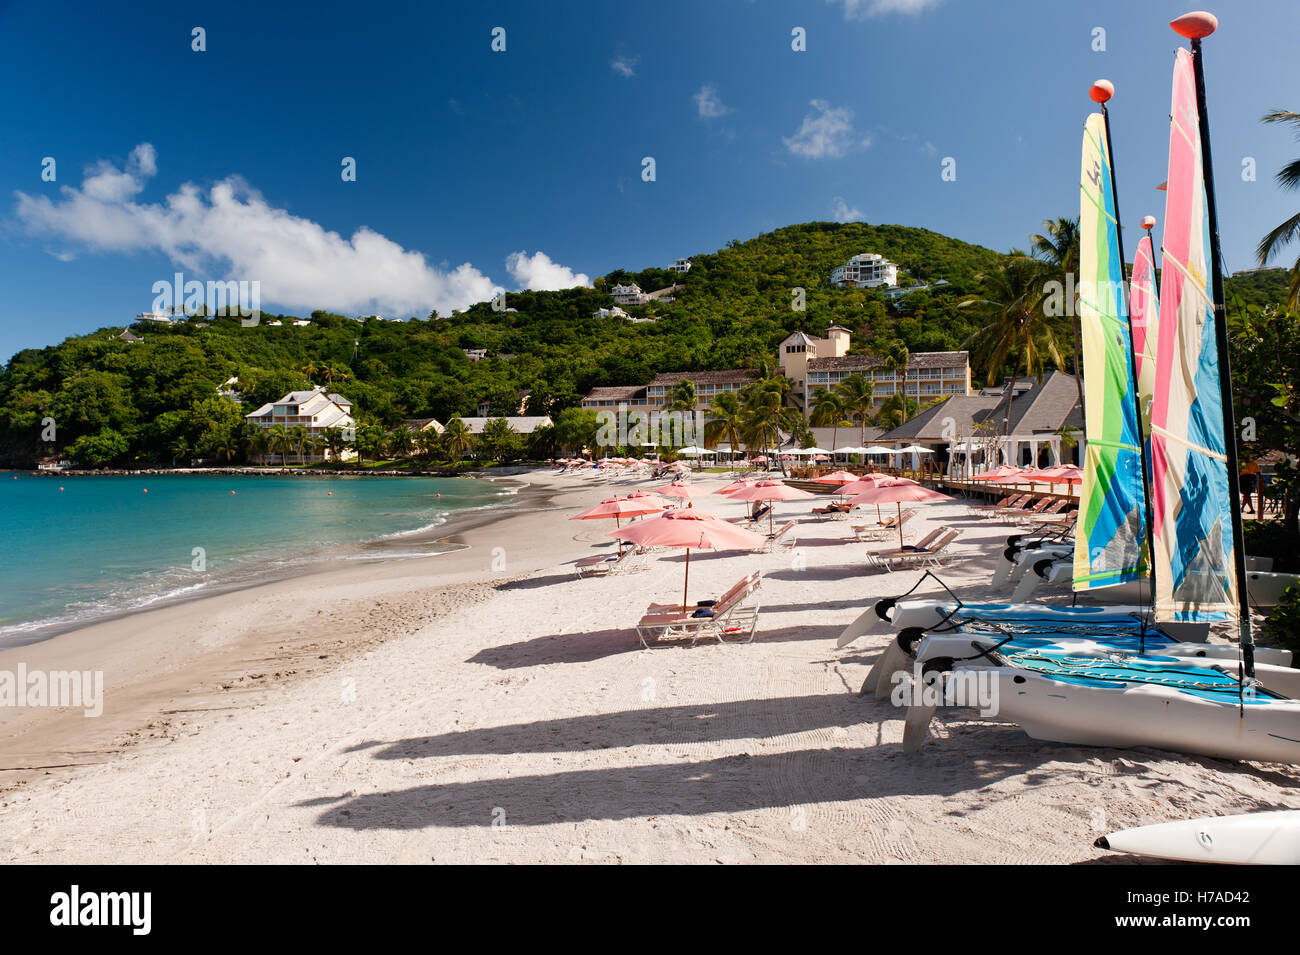 Secluded beach resort on Caribbean island of St Lucia Stock Photo